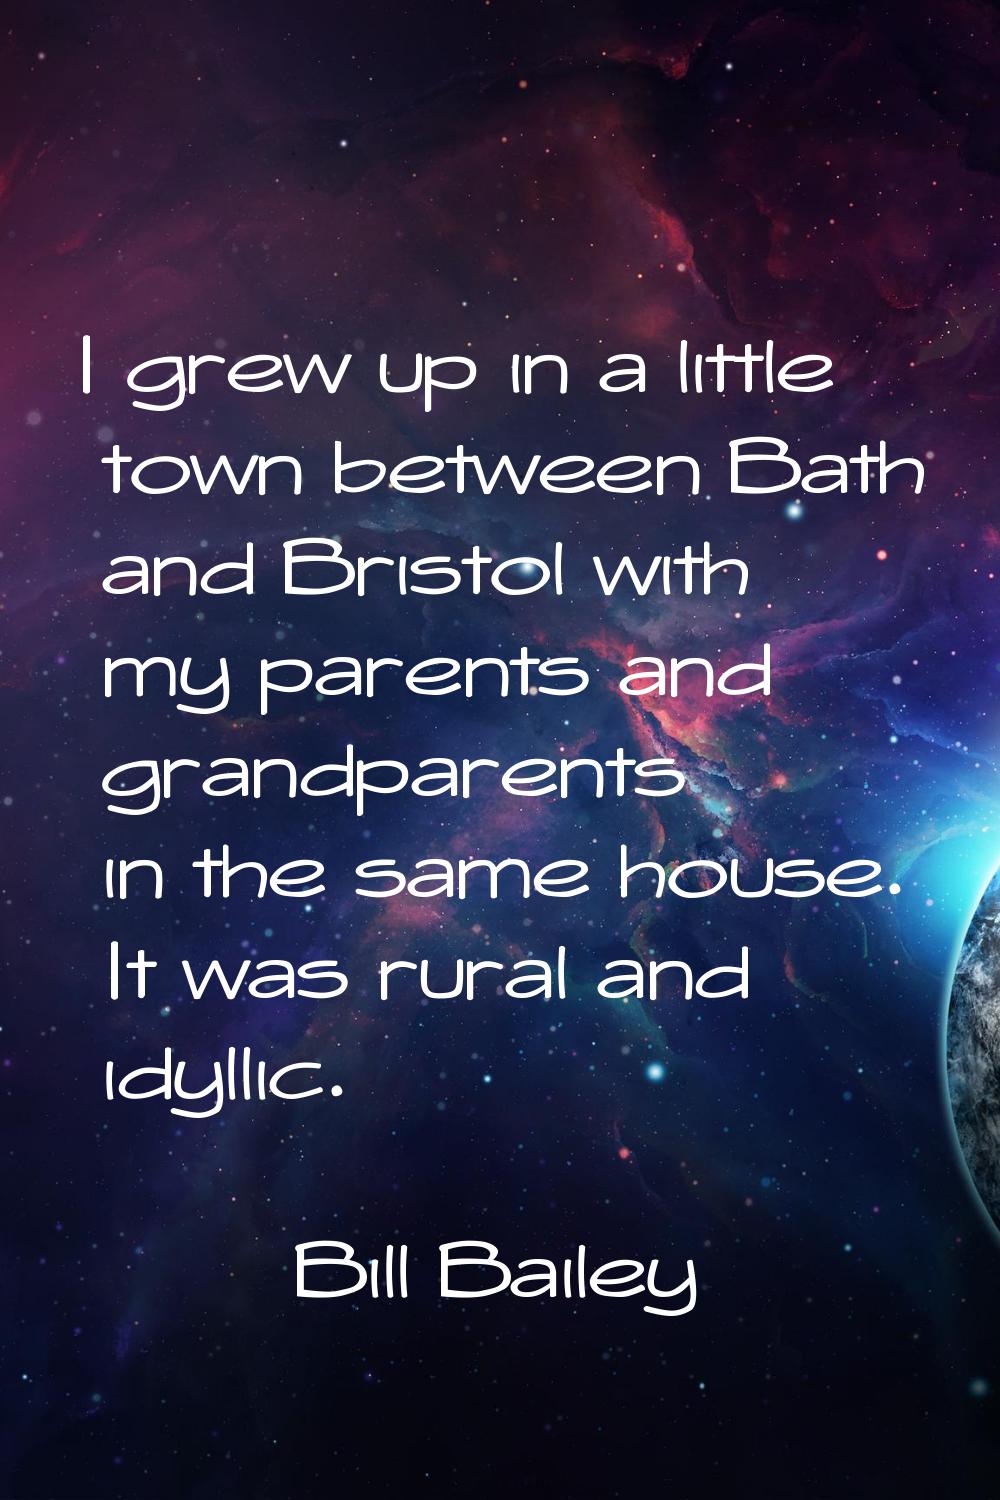 I grew up in a little town between Bath and Bristol with my parents and grandparents in the same ho